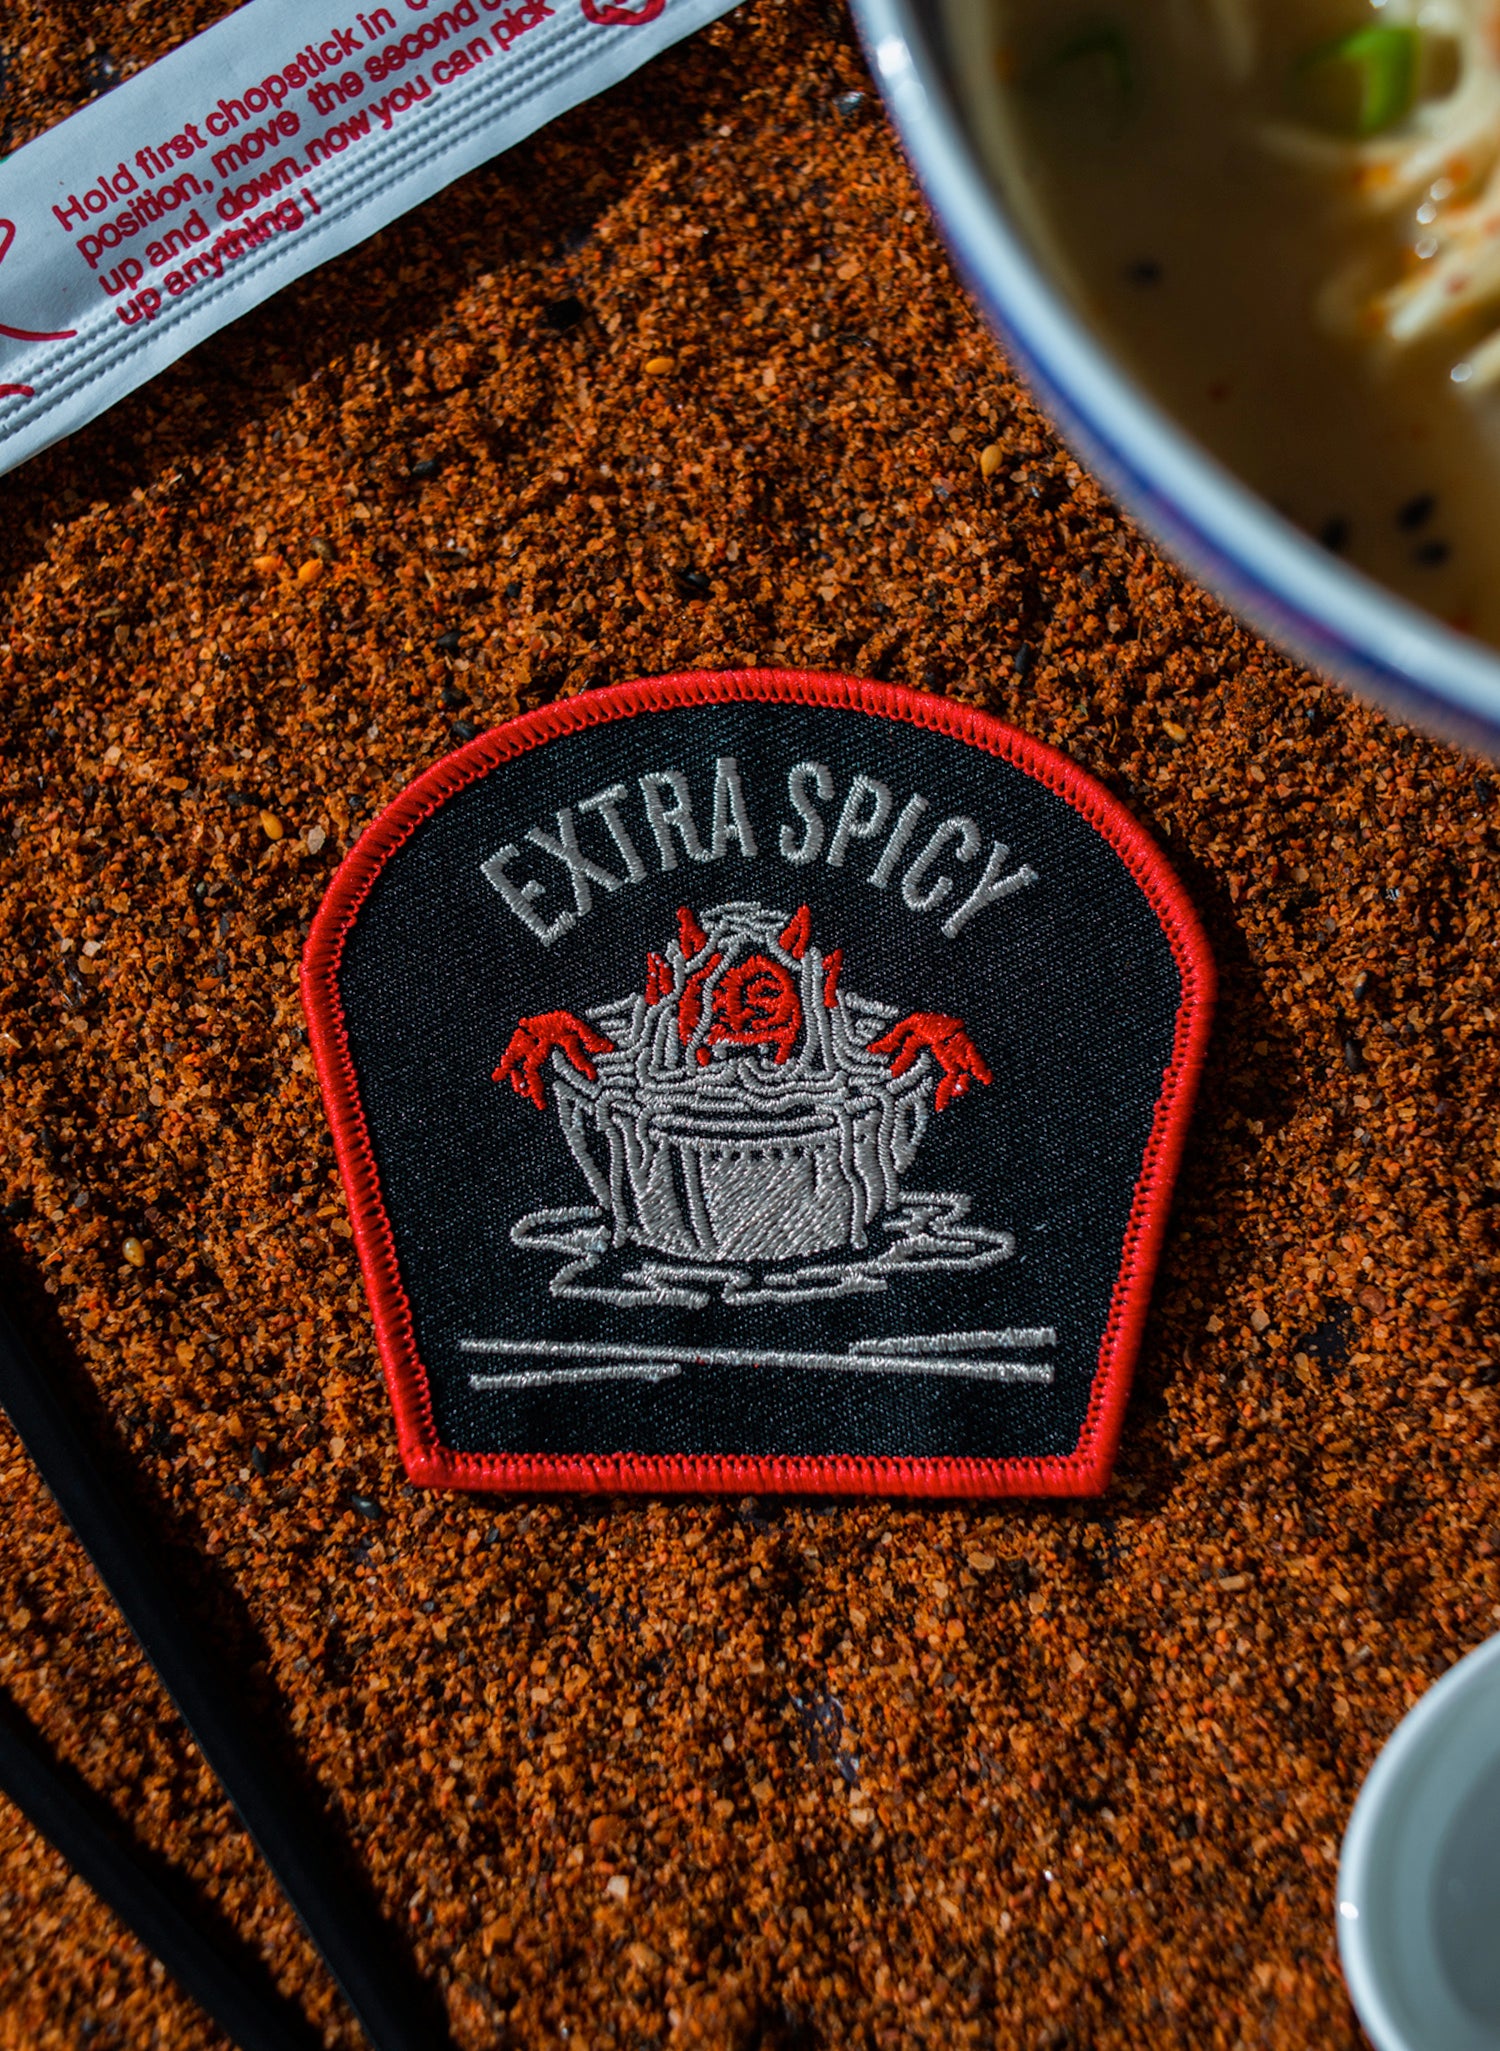 Extra Spicy Noodles Devil Patch by Pyknic | Ramen Noodles, Sriracha Hot Sauce, Cotton Twill Patch for Jacket